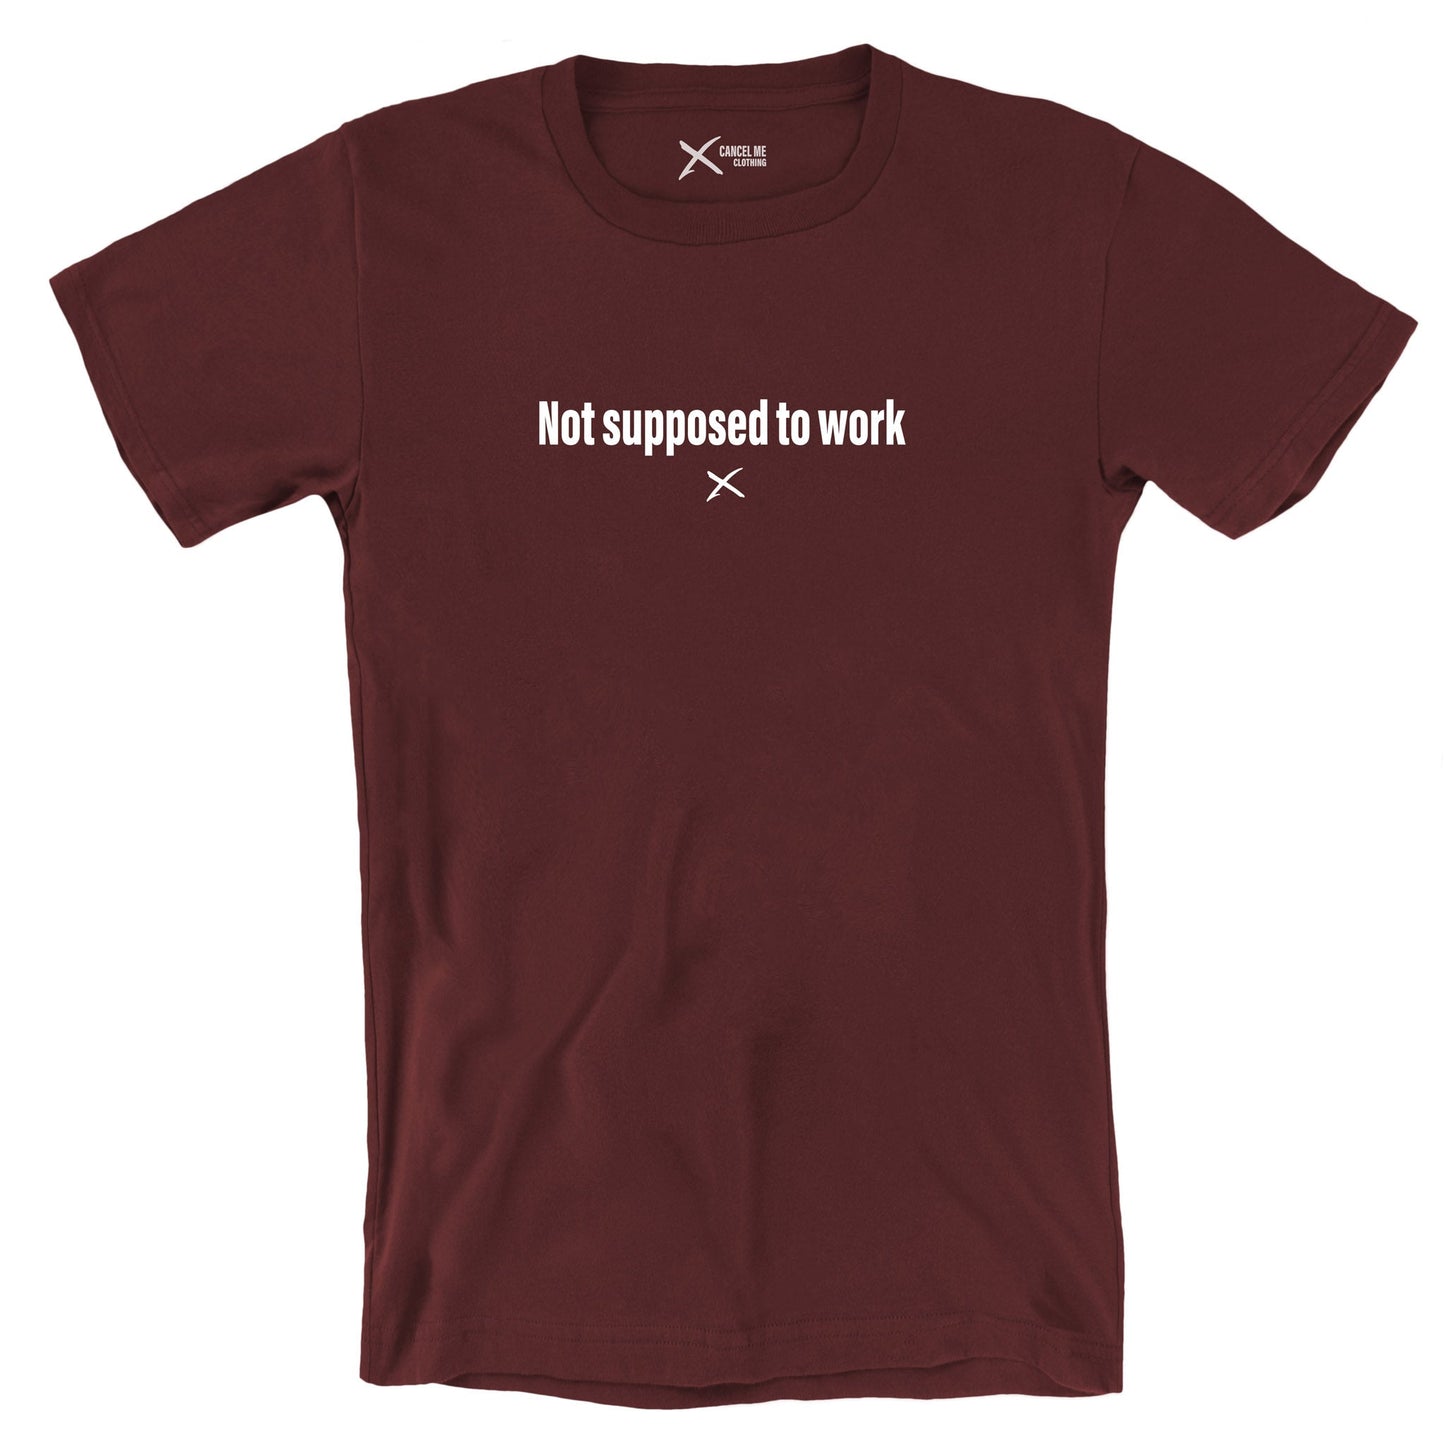 Not supposed to work - Shirt